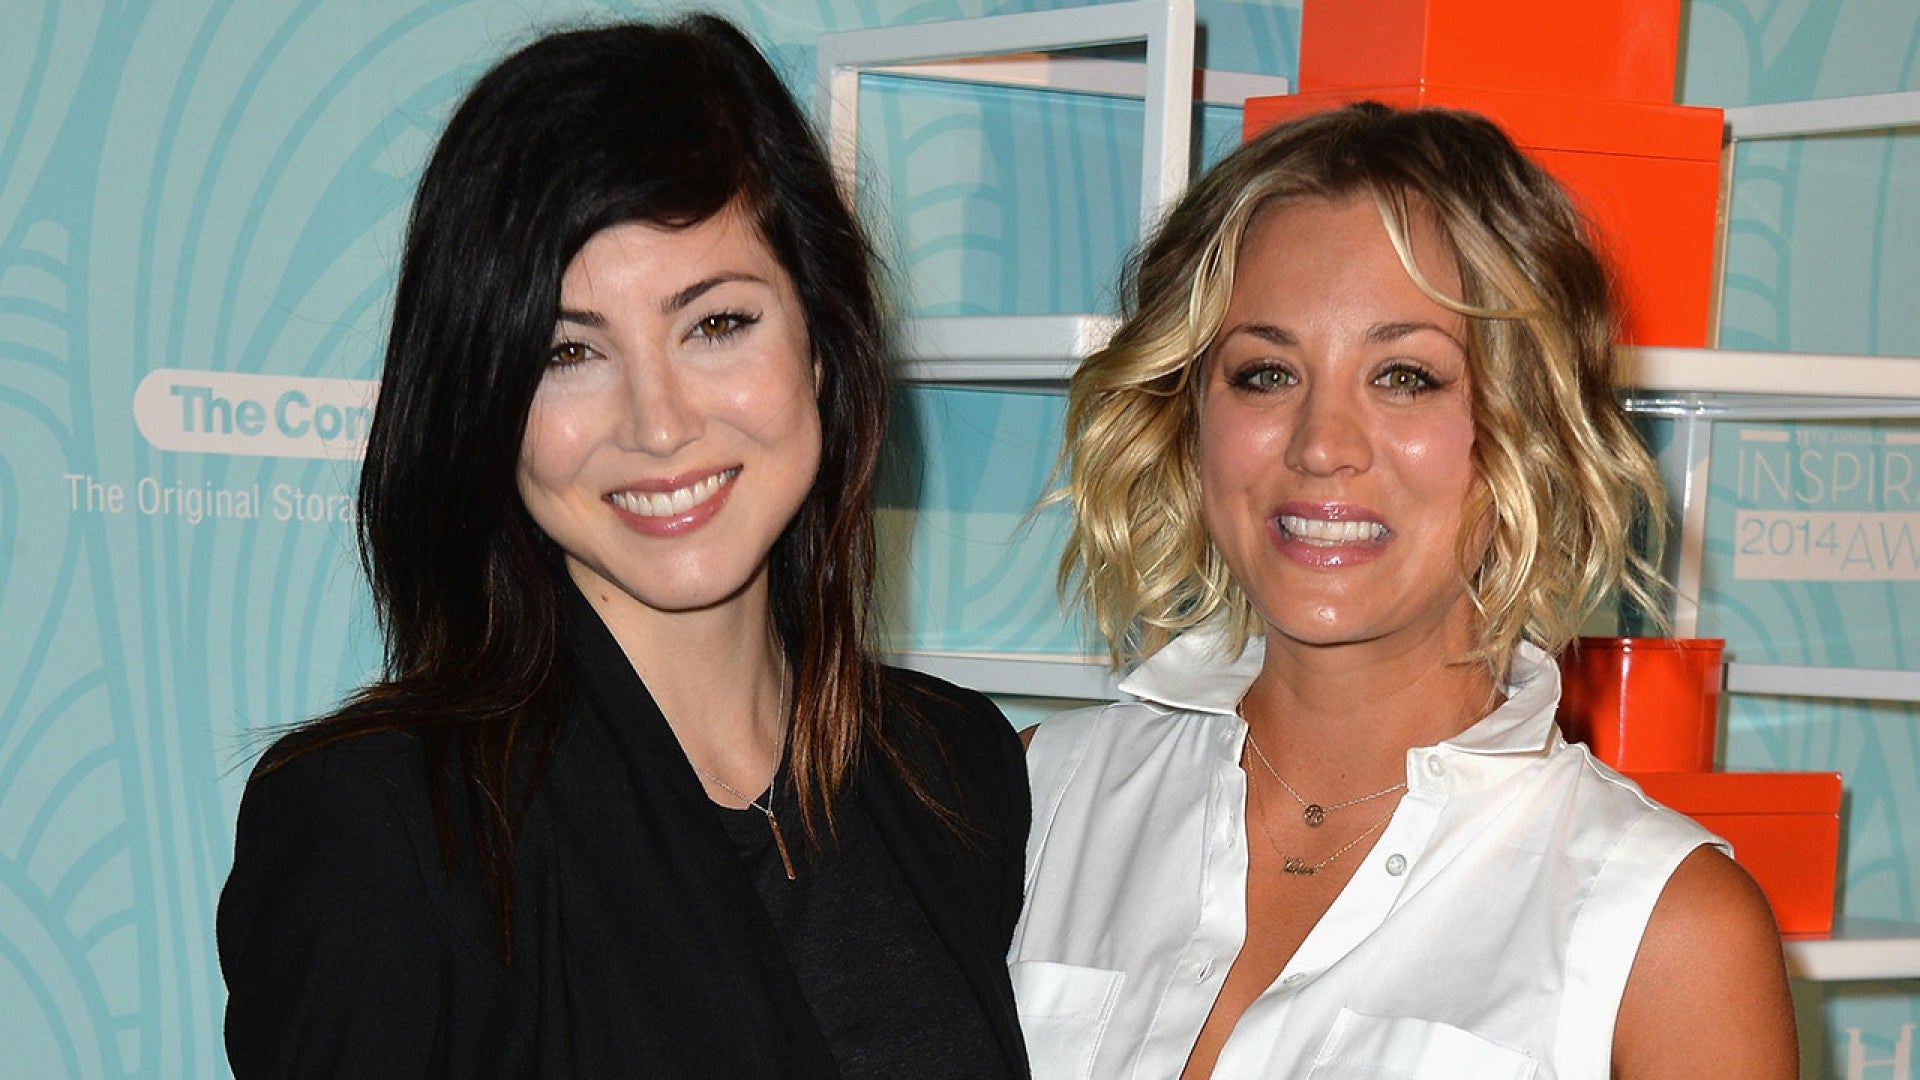 Kaley Cuoco Porn Video Sister - EXCLUSIVE: Kaley Cuoco's Sister Briana Says Kaley Is 'So Happy' Since  Splitting From Ryan Sweeting